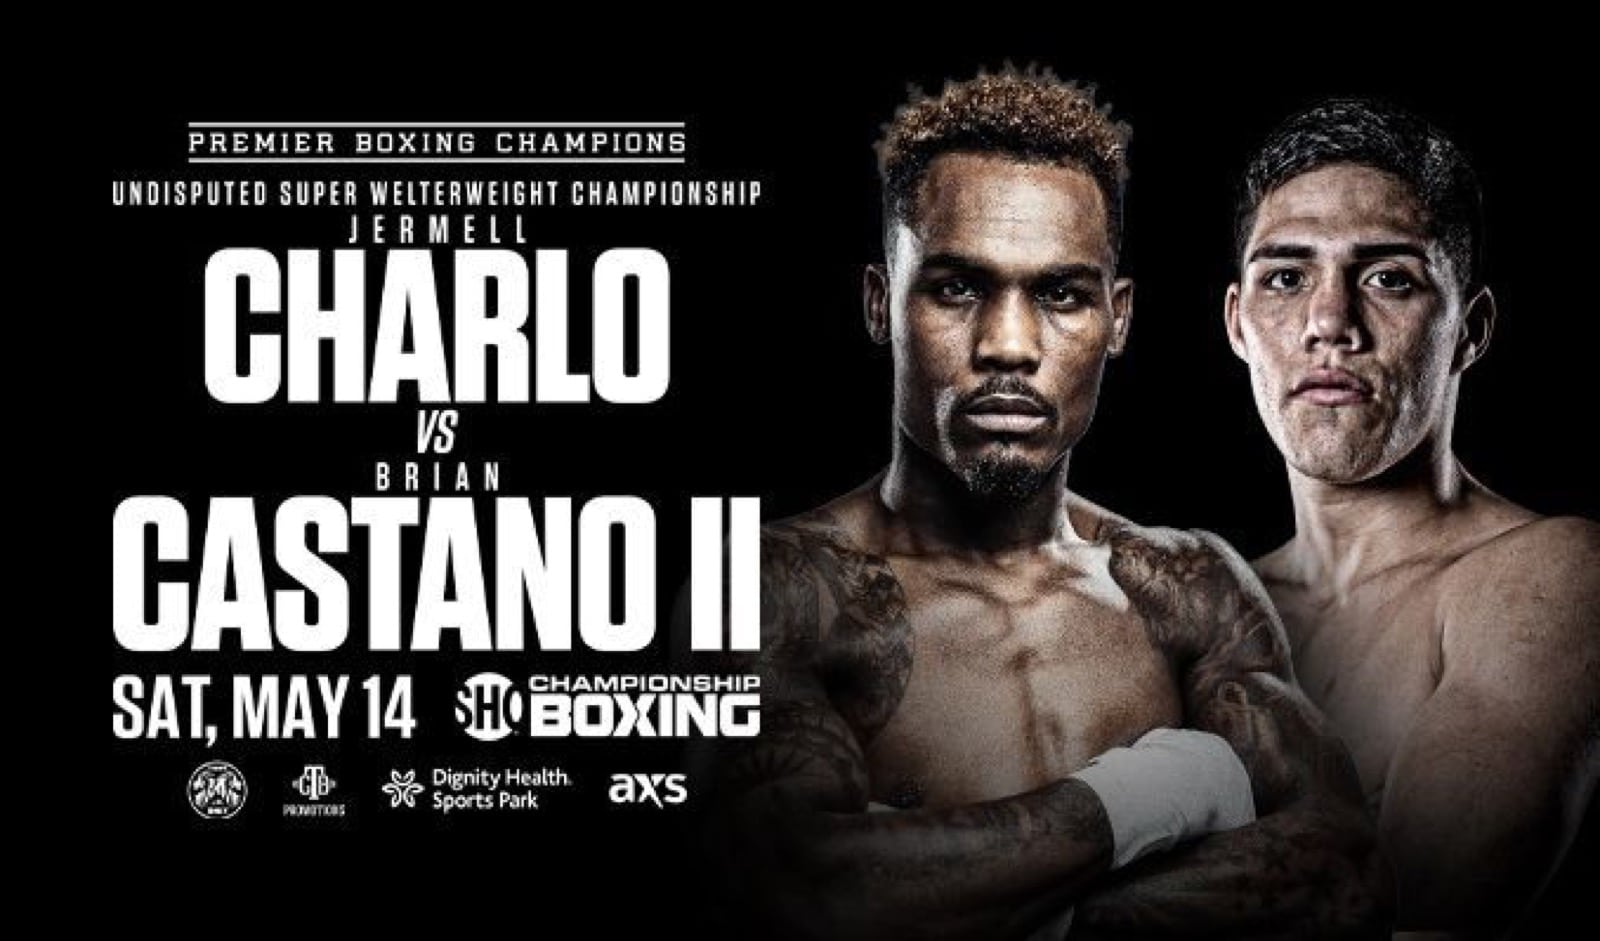 Jermell Charlo vs Castano II - Showtime - May 14 - 9 pm ET